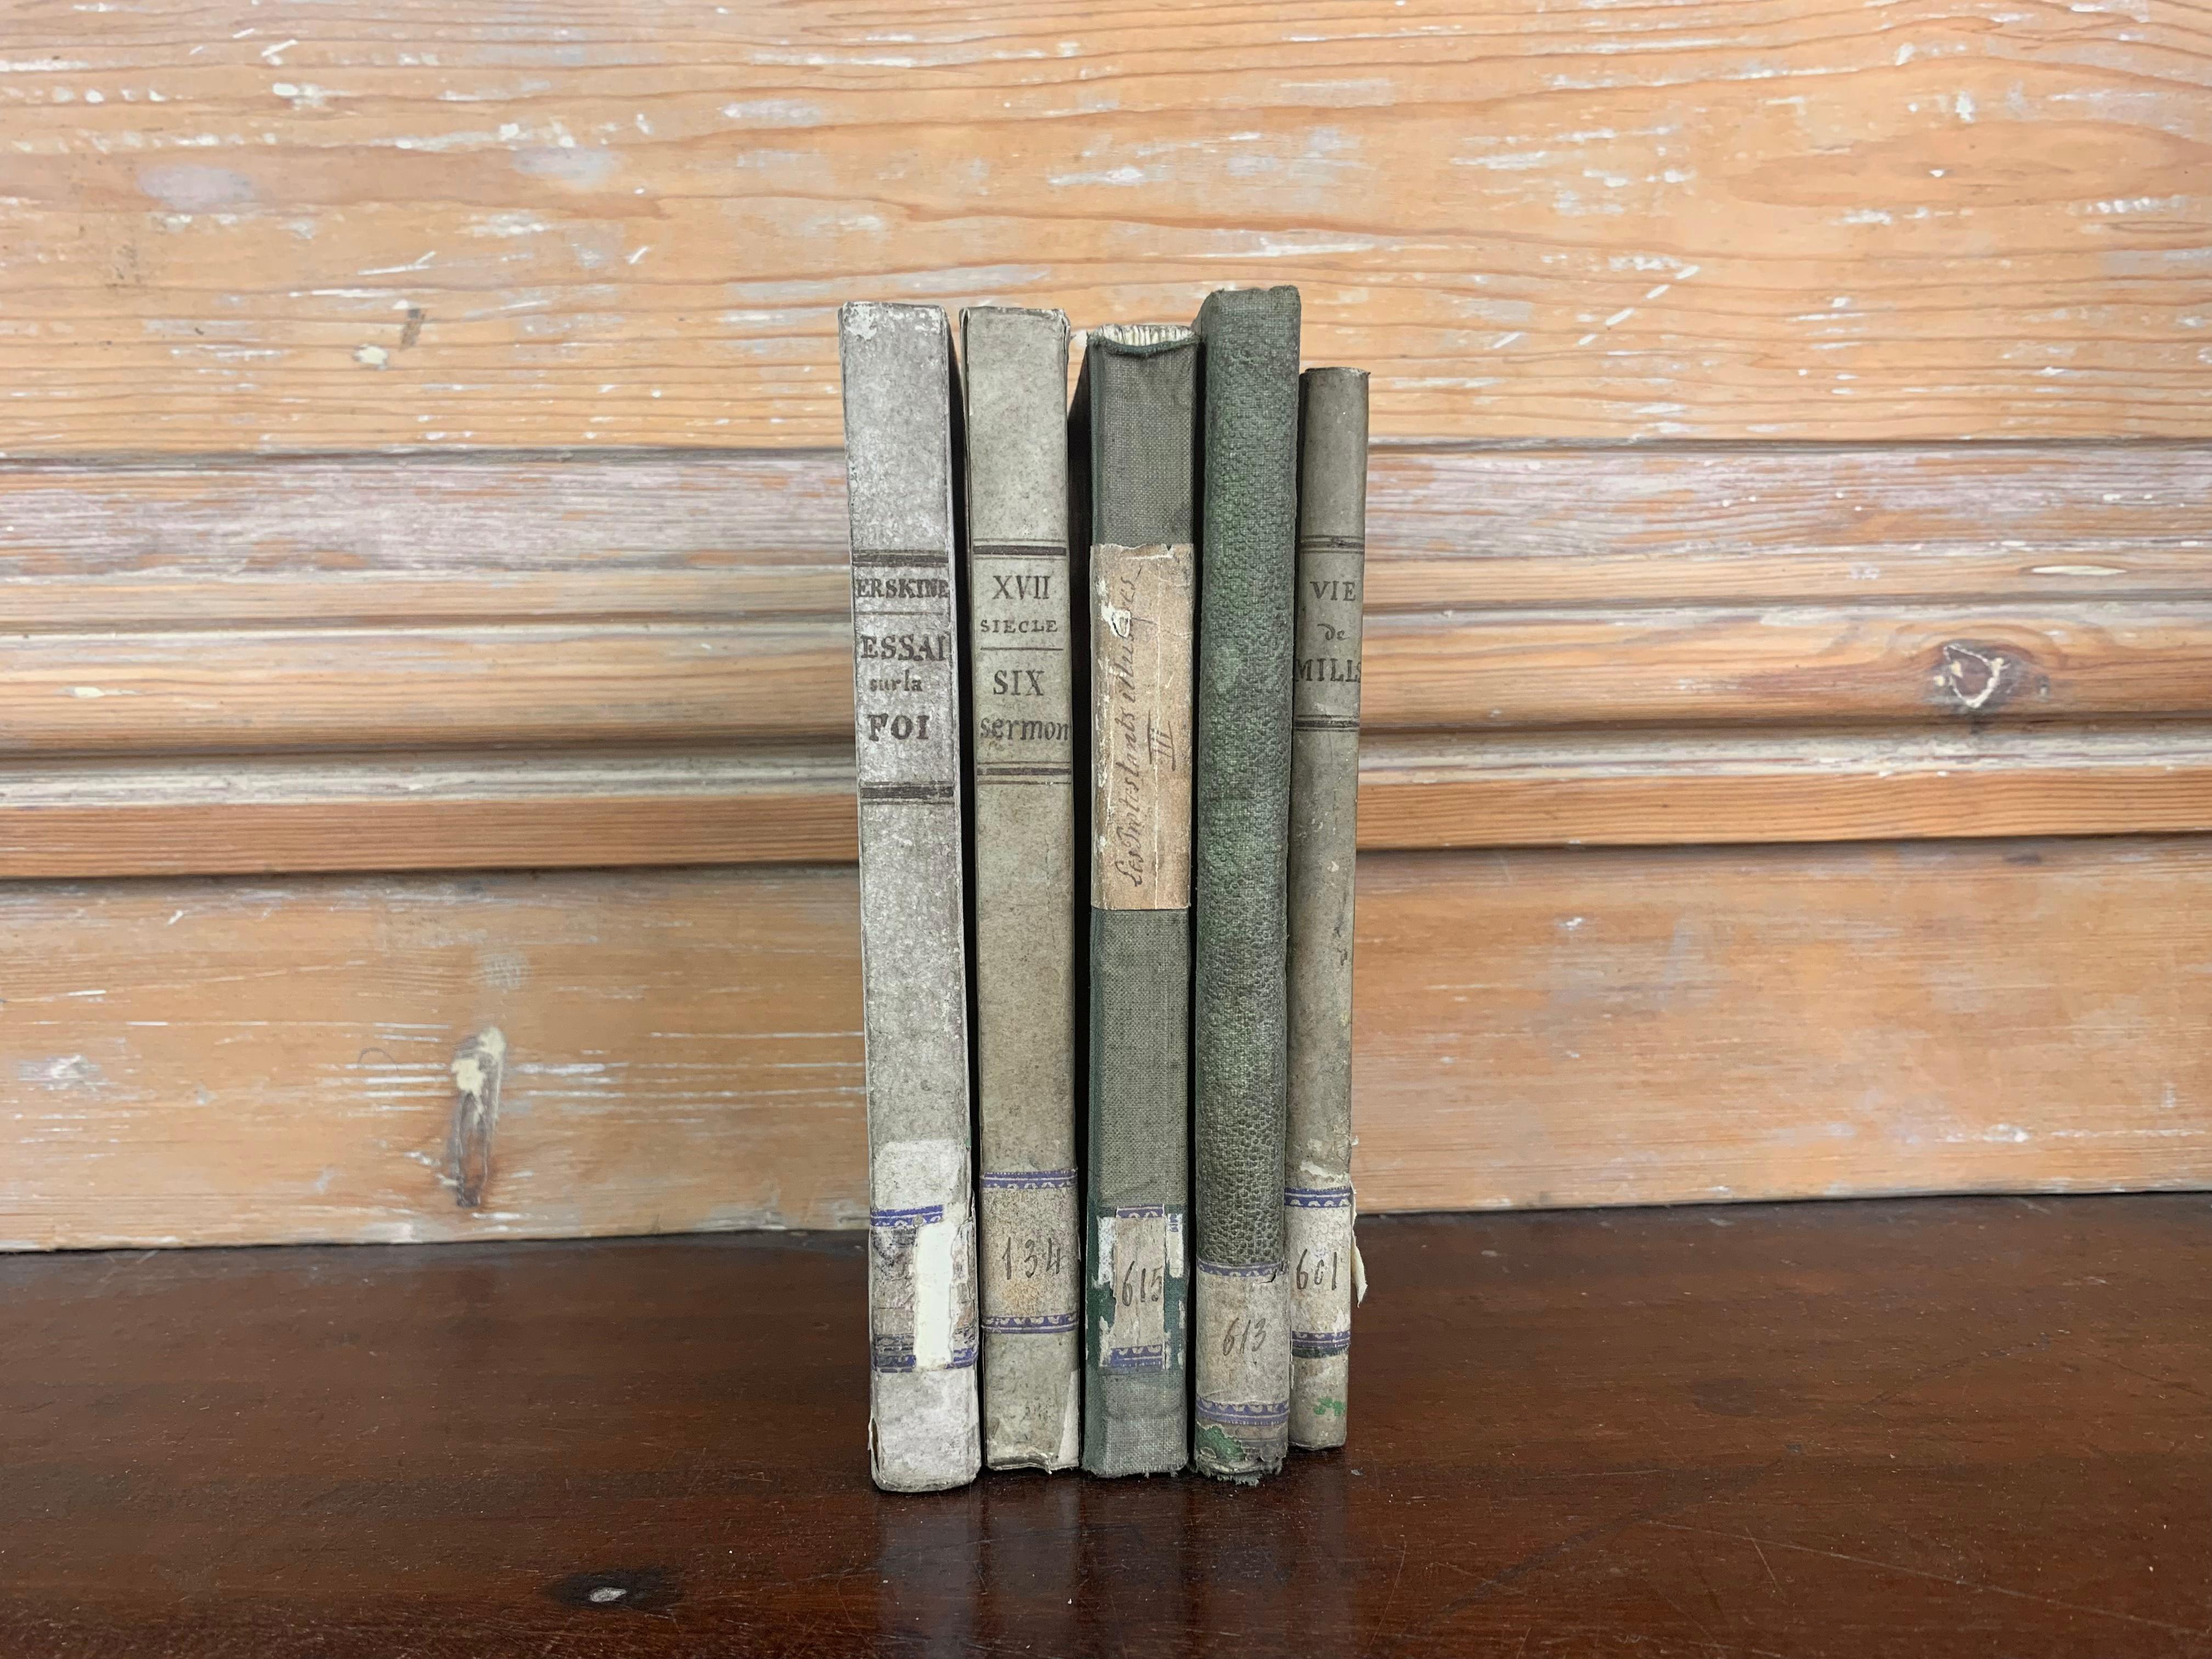 Set of old books dating from the 19th century. For example we have a book on 